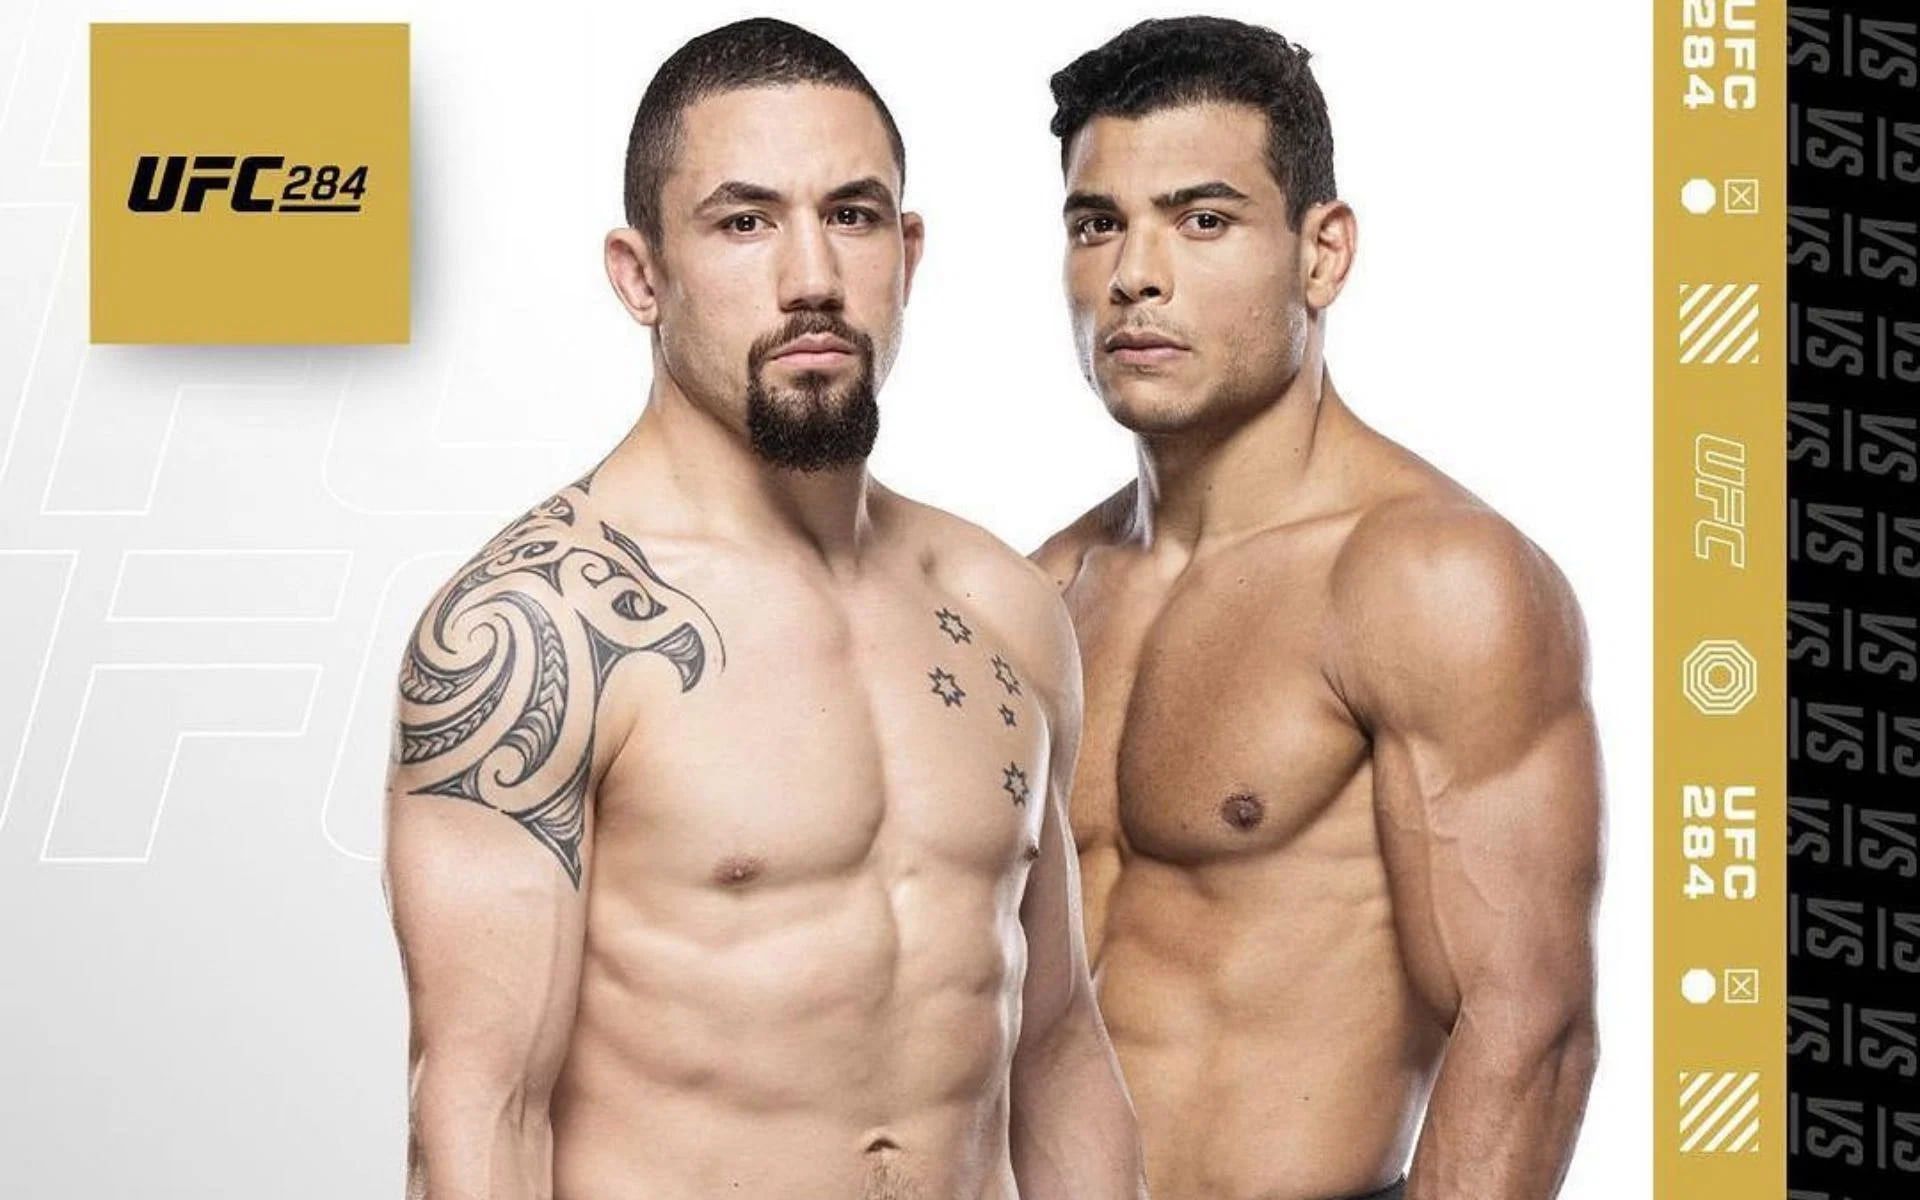 Robert Whittaker vs. Paulo Costa: Preview, Where to Watch and Betting Odds